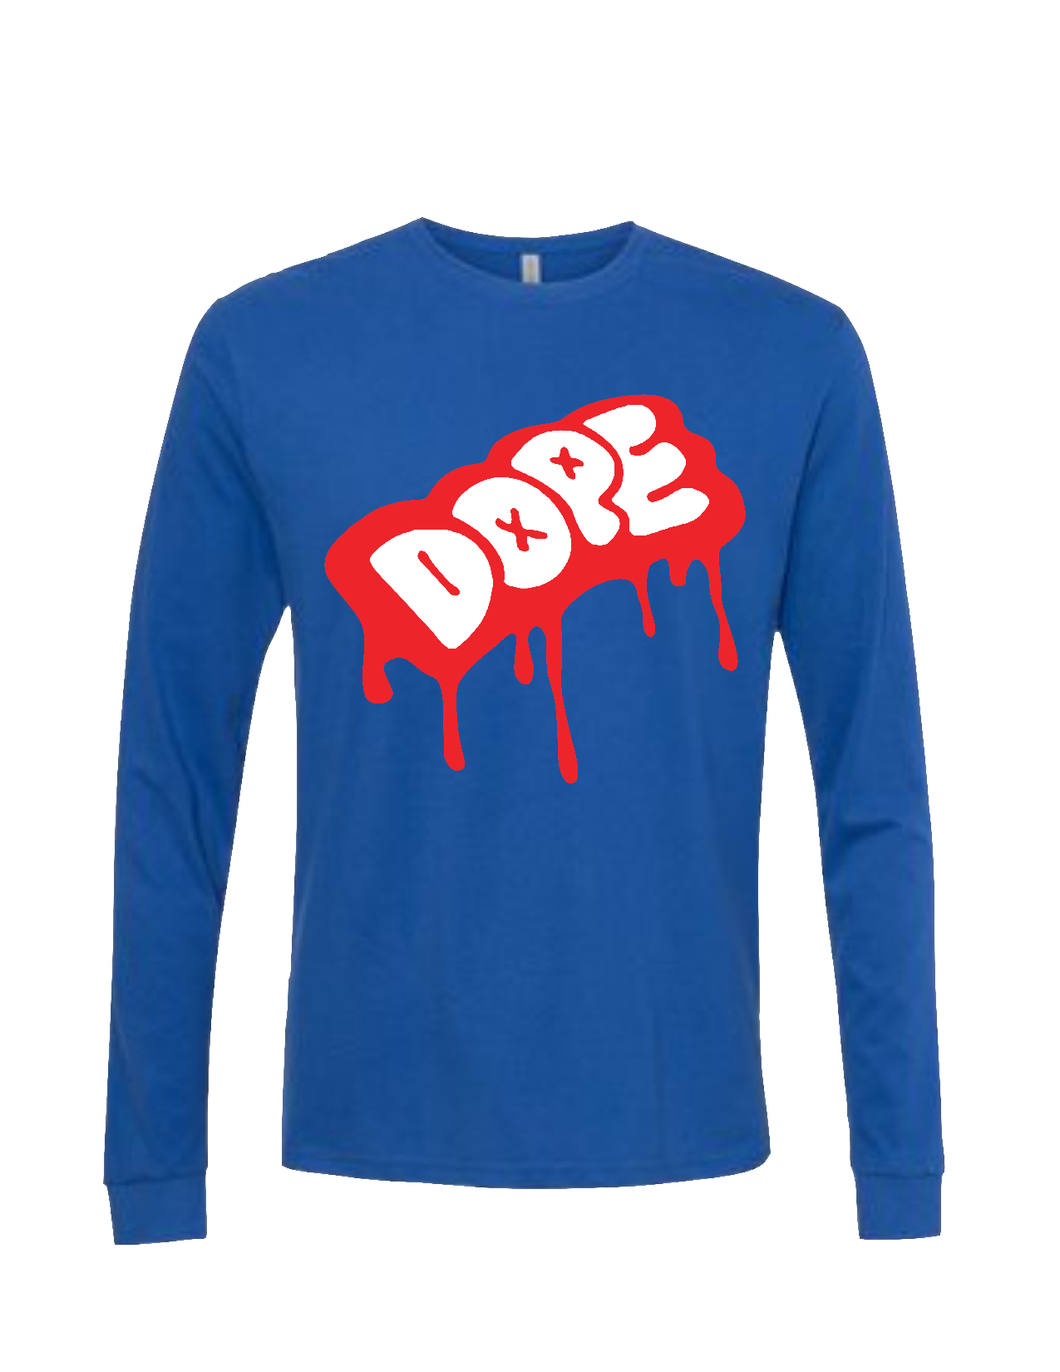 Dope Dripping Long Sleeve